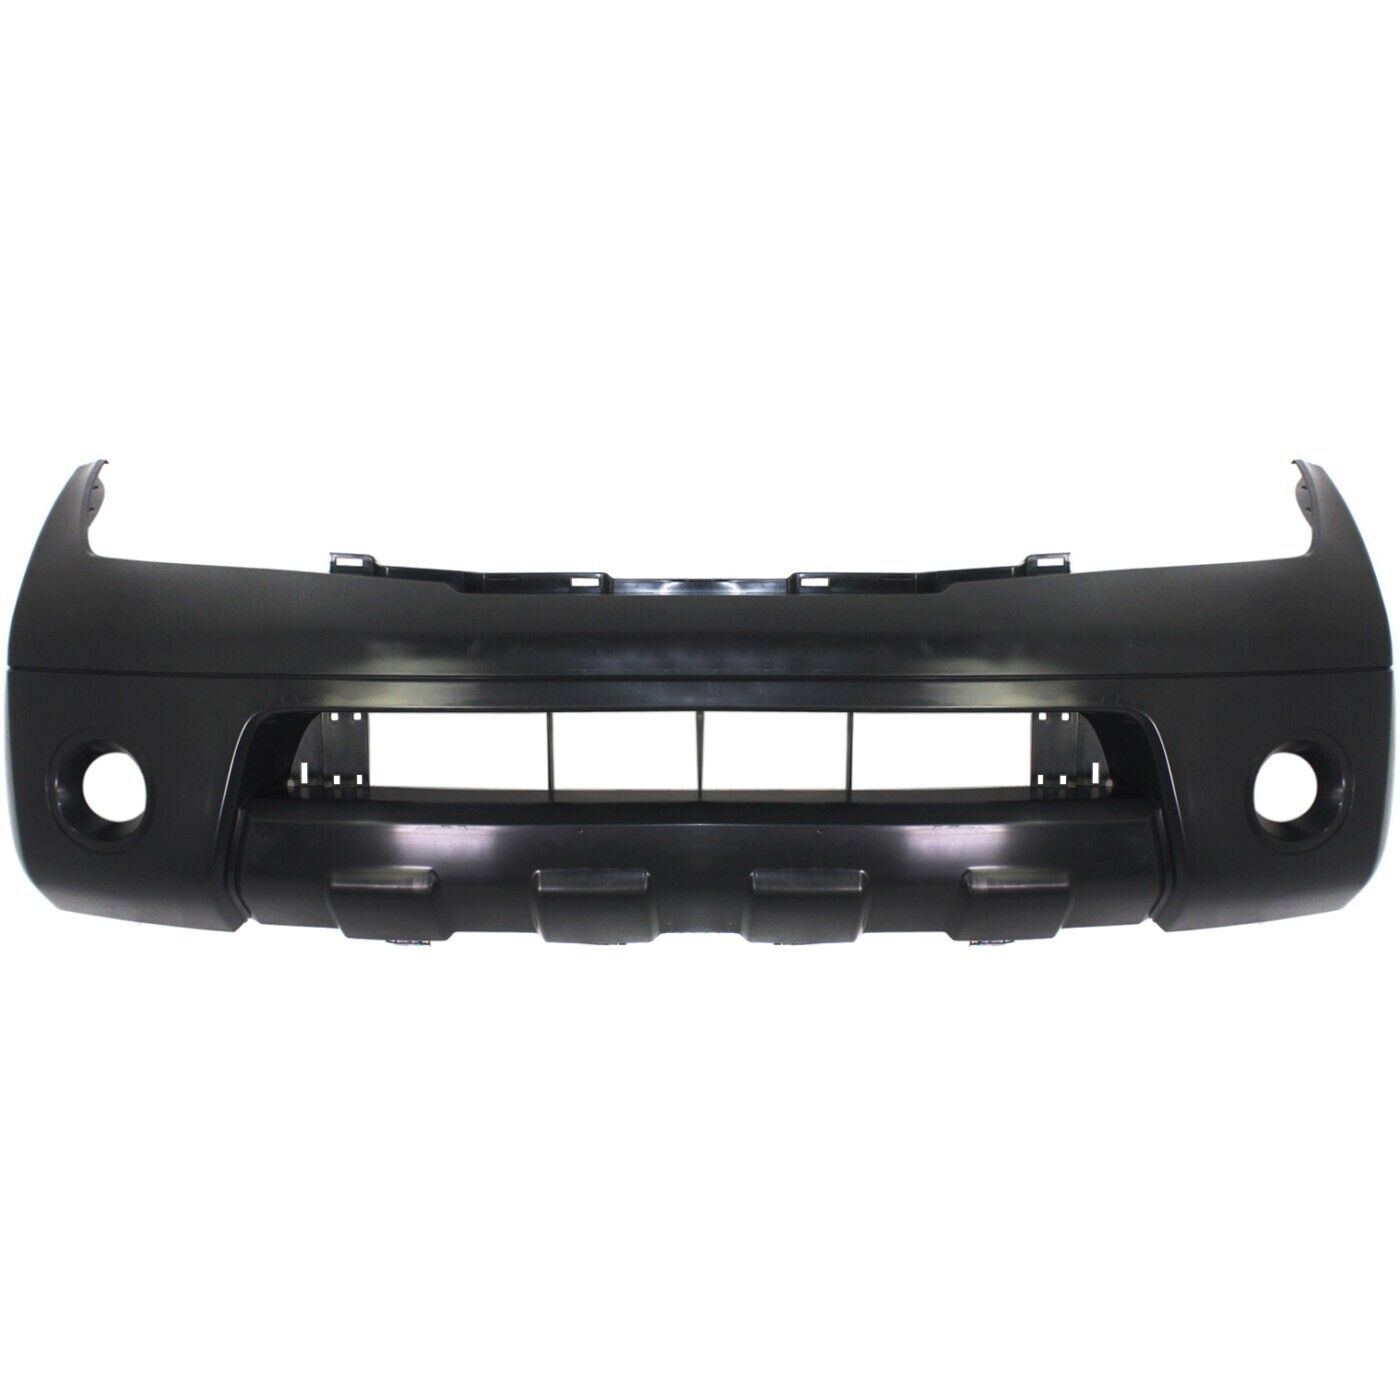 Front Bumper Cover For 2005-2008 Nissan Pathfinder w/ fog lamp holes Textured